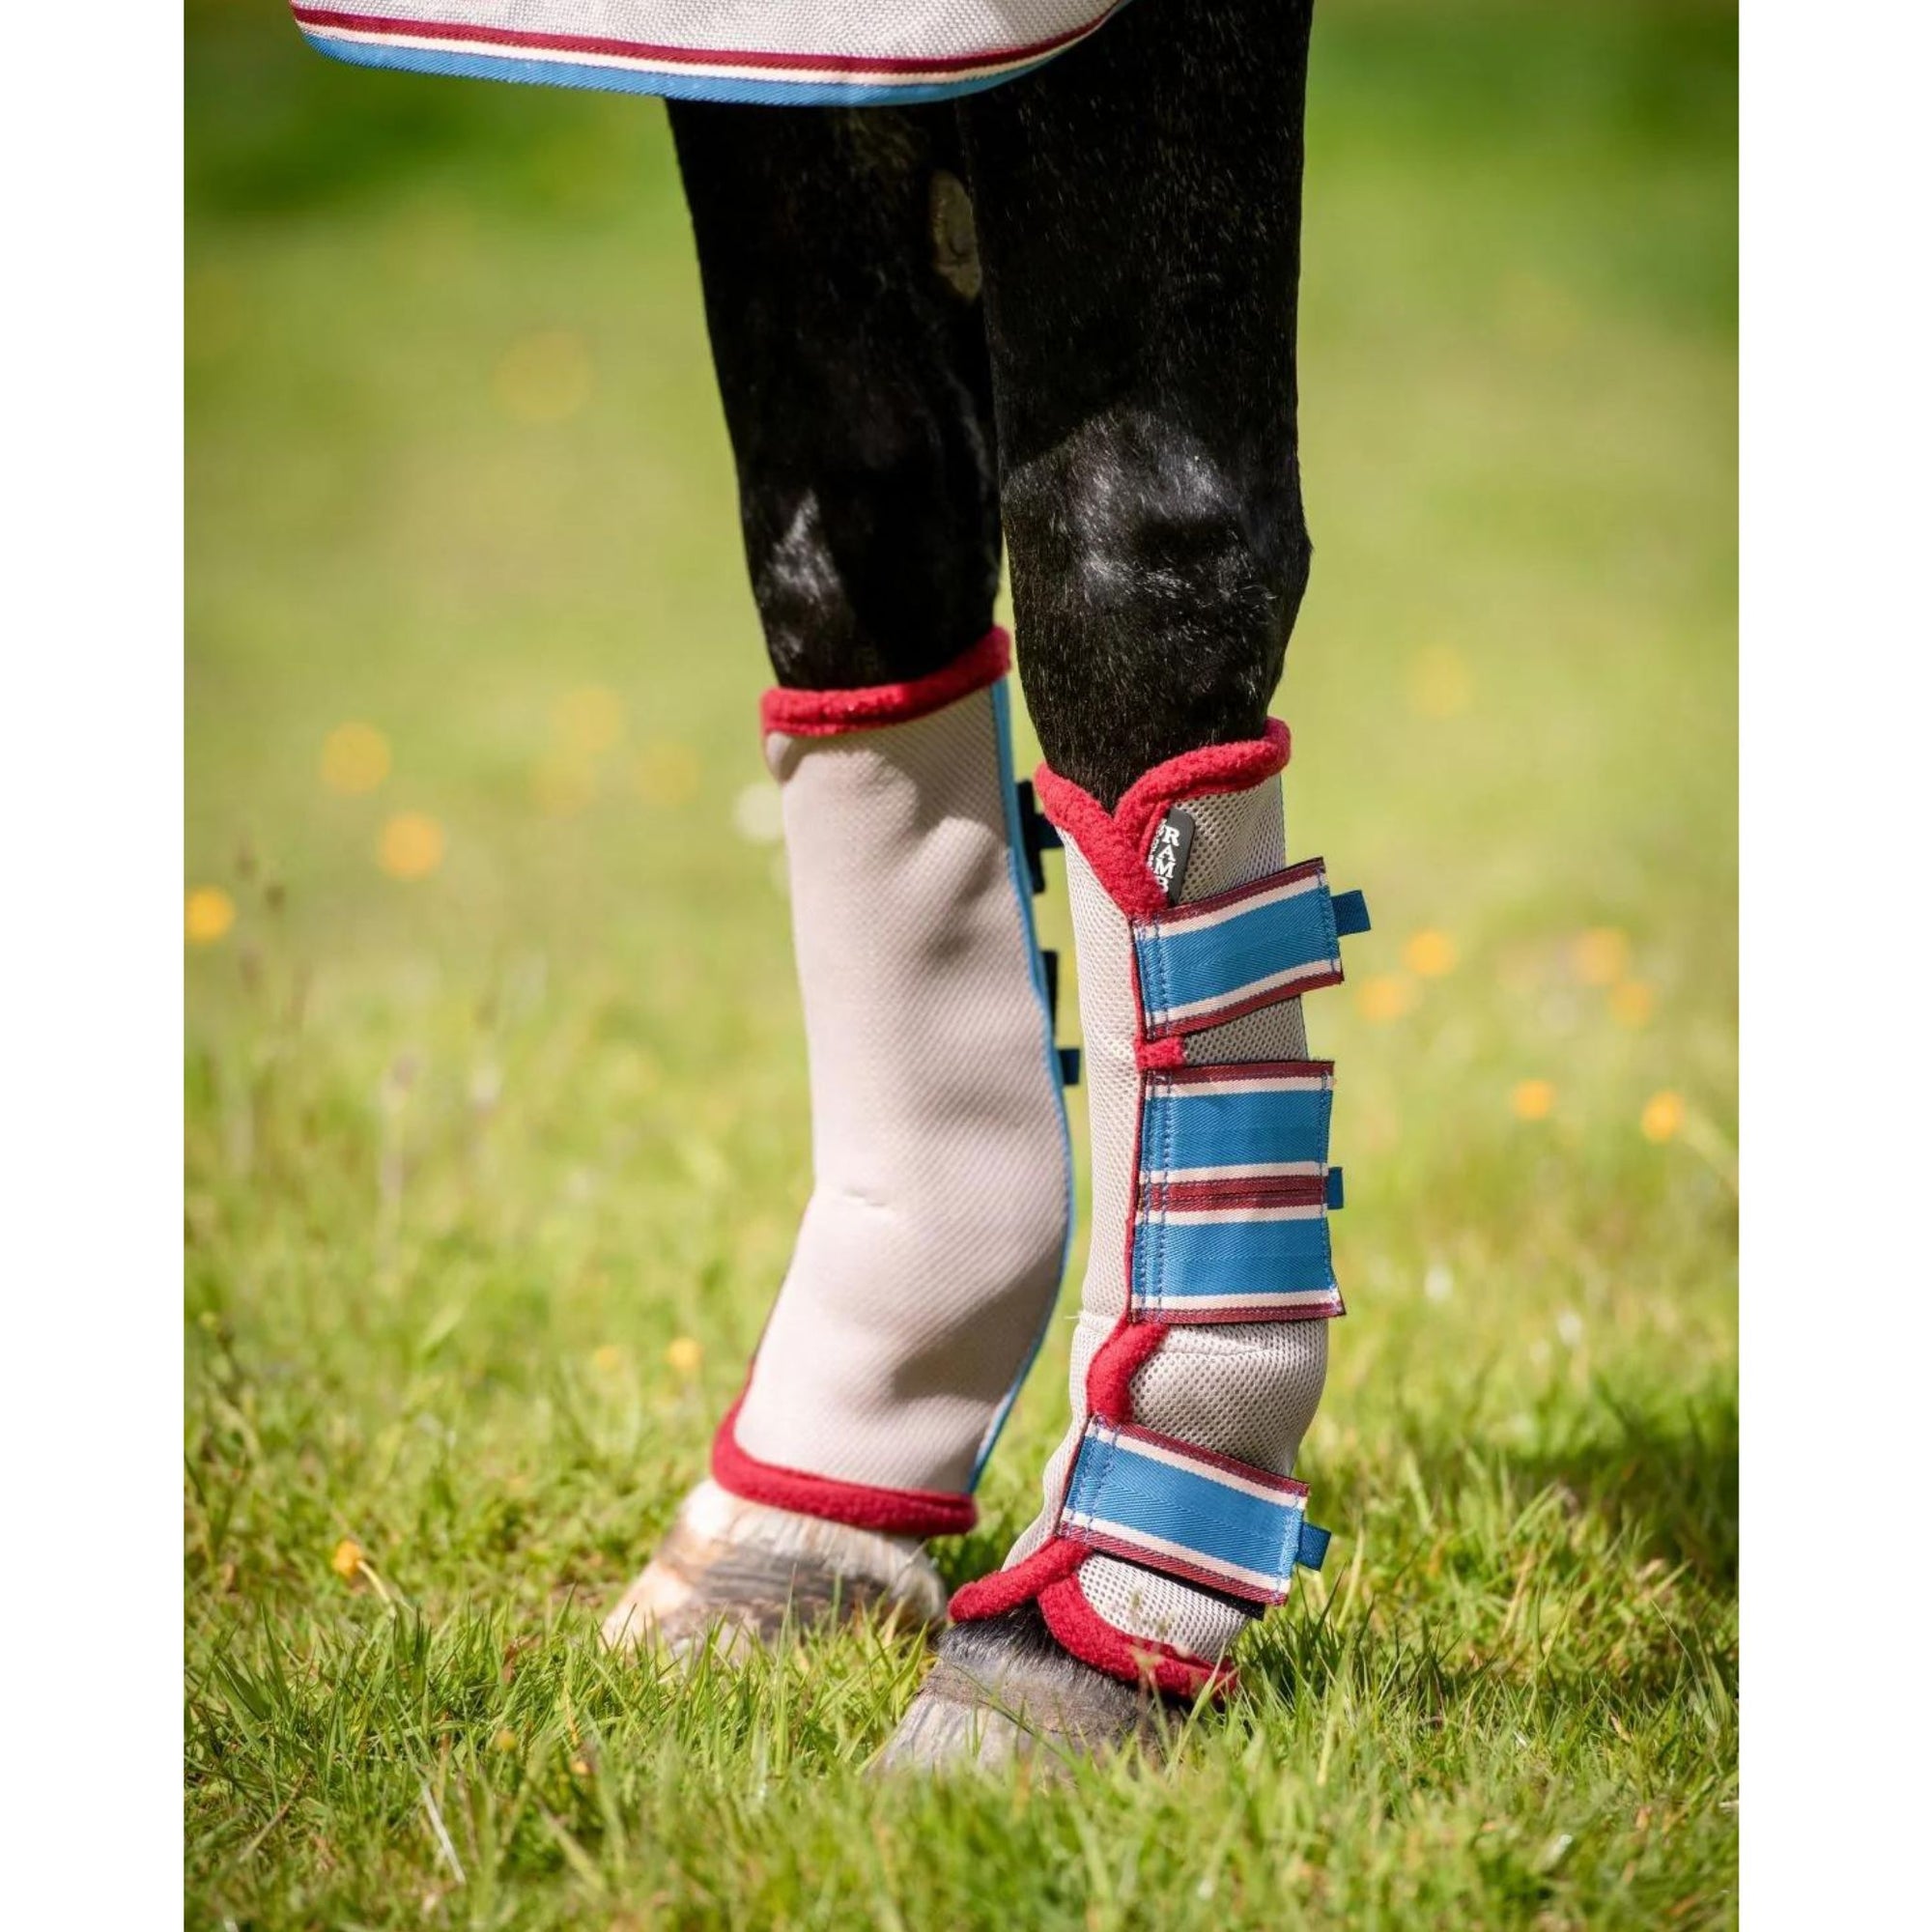 Horse wearing white, red and blue flymesh boots.